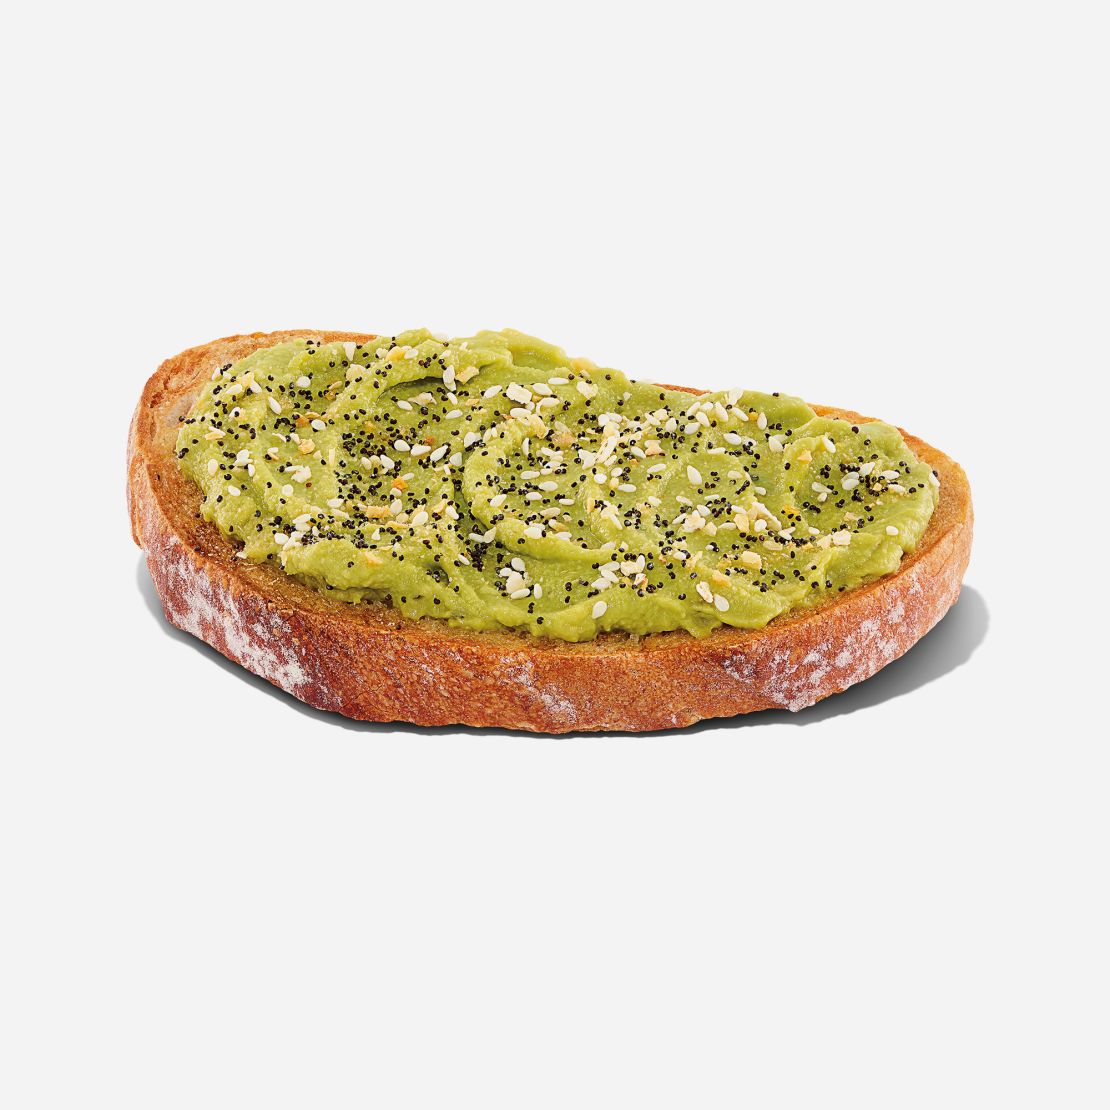 Dunkin' is now selling $2.99 avocado toast.